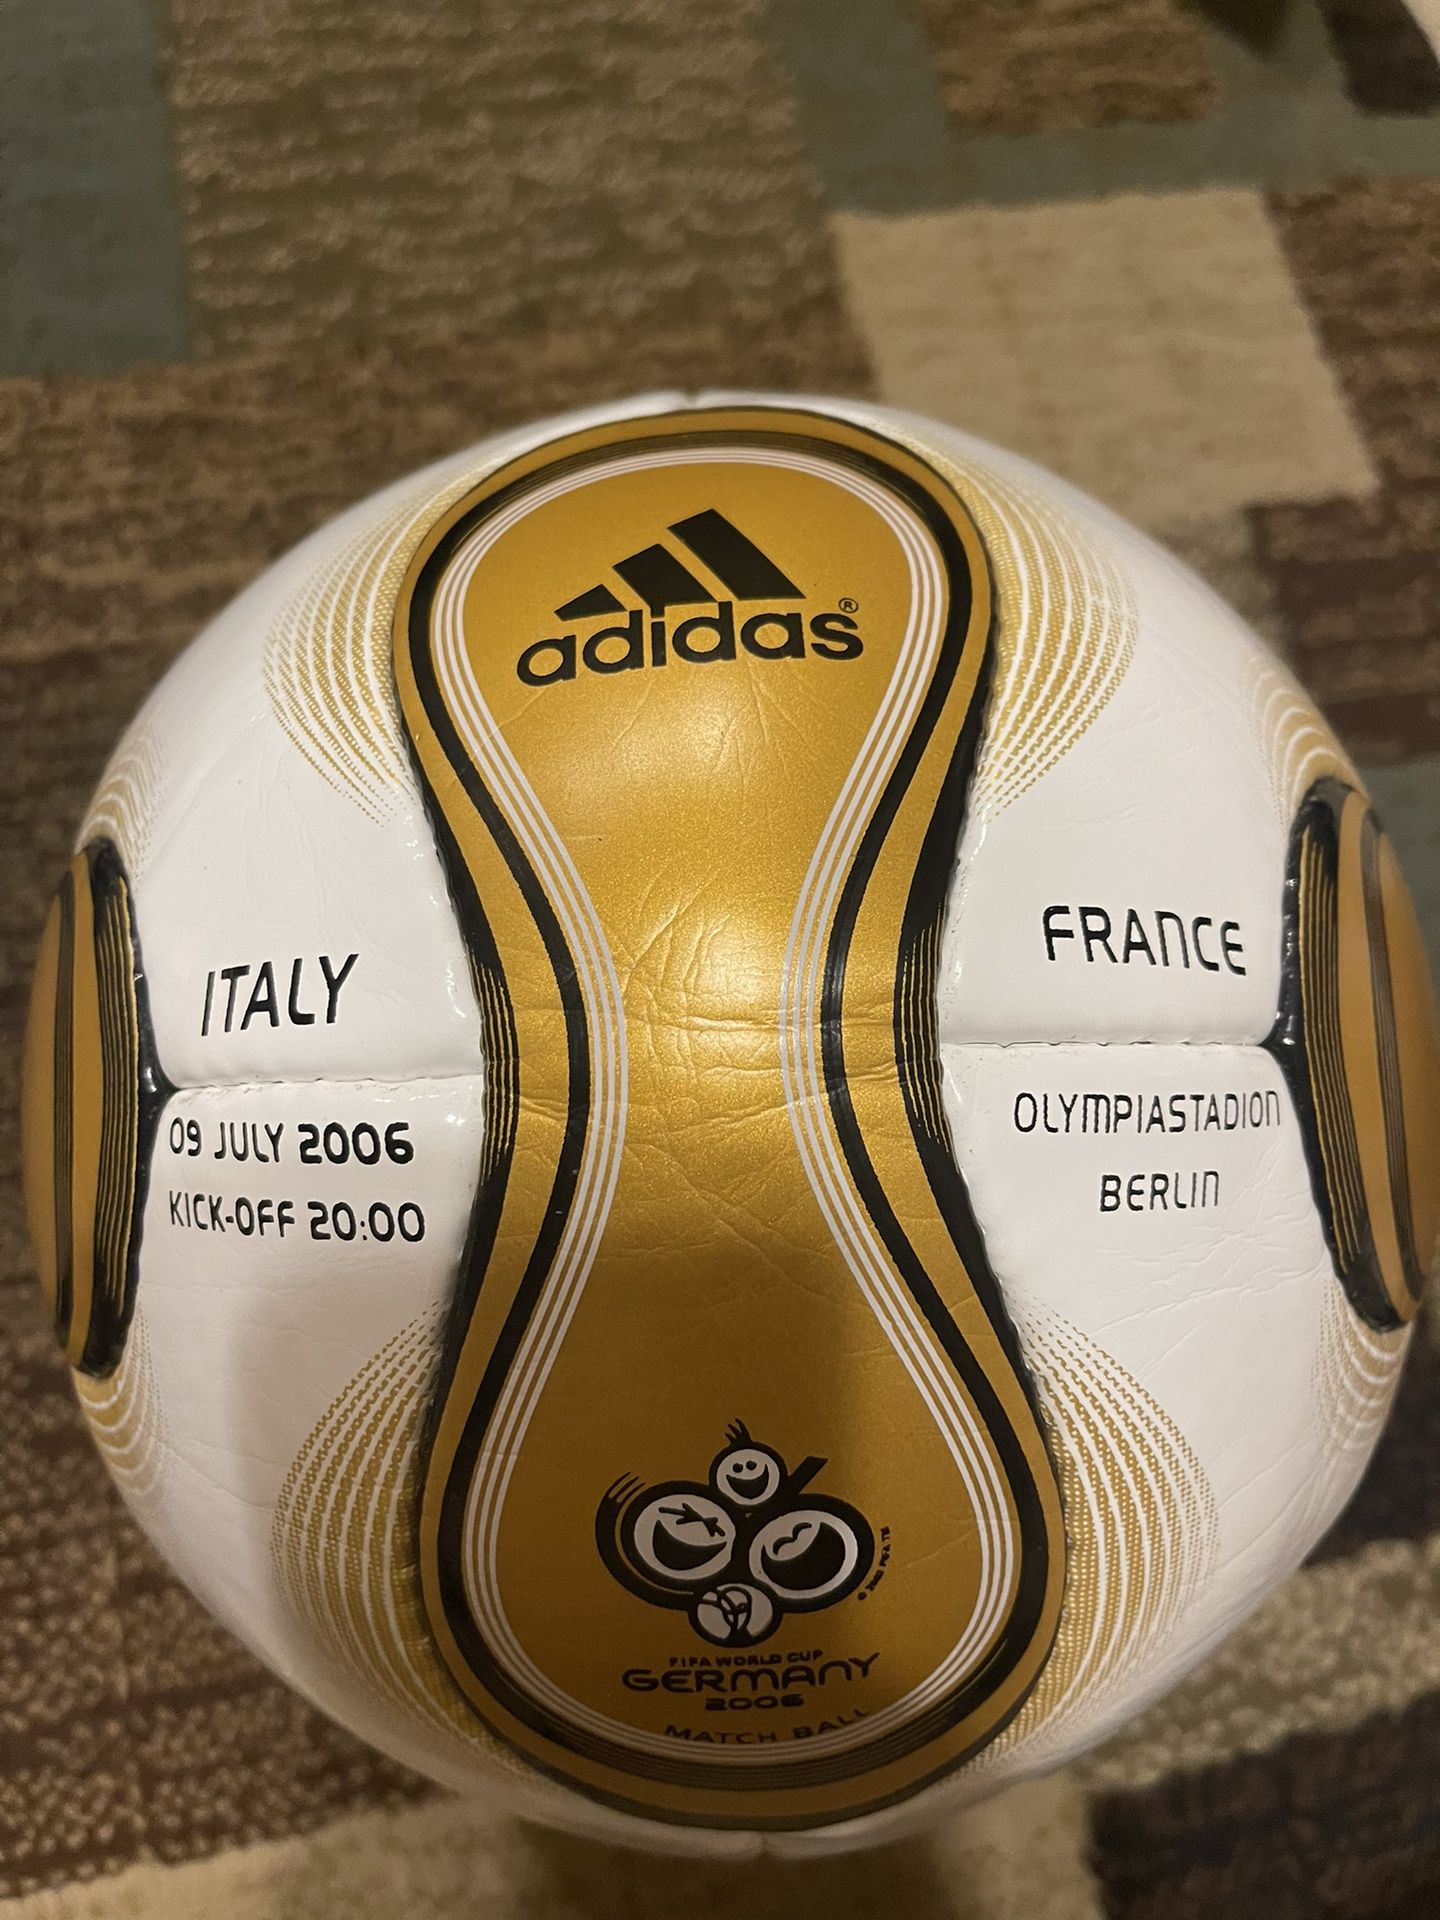 Adidas Teamgeist Germany | Match Ball | Berlin | FIFA World Cup 2006 for Sale in Highland Park, OfferUp